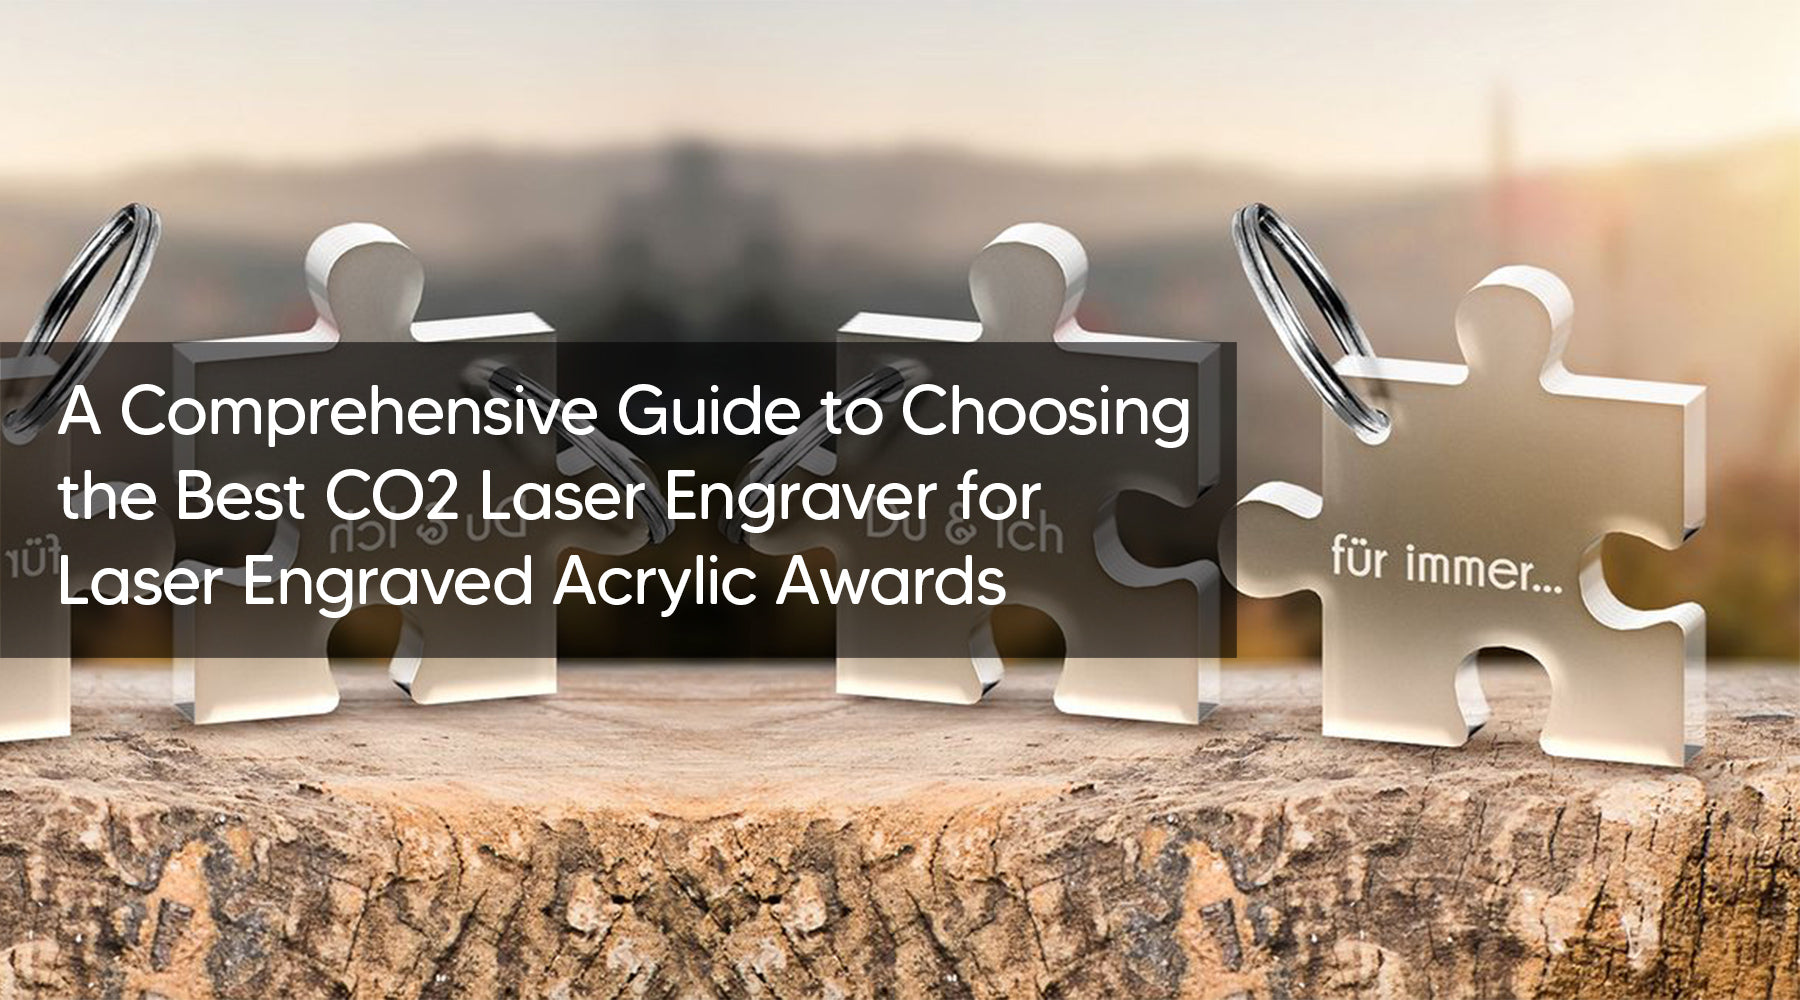 A Comprehensive Guide to Choosing the Best CO2 Laser Engraver for Laser Engraved Acrylic Awards